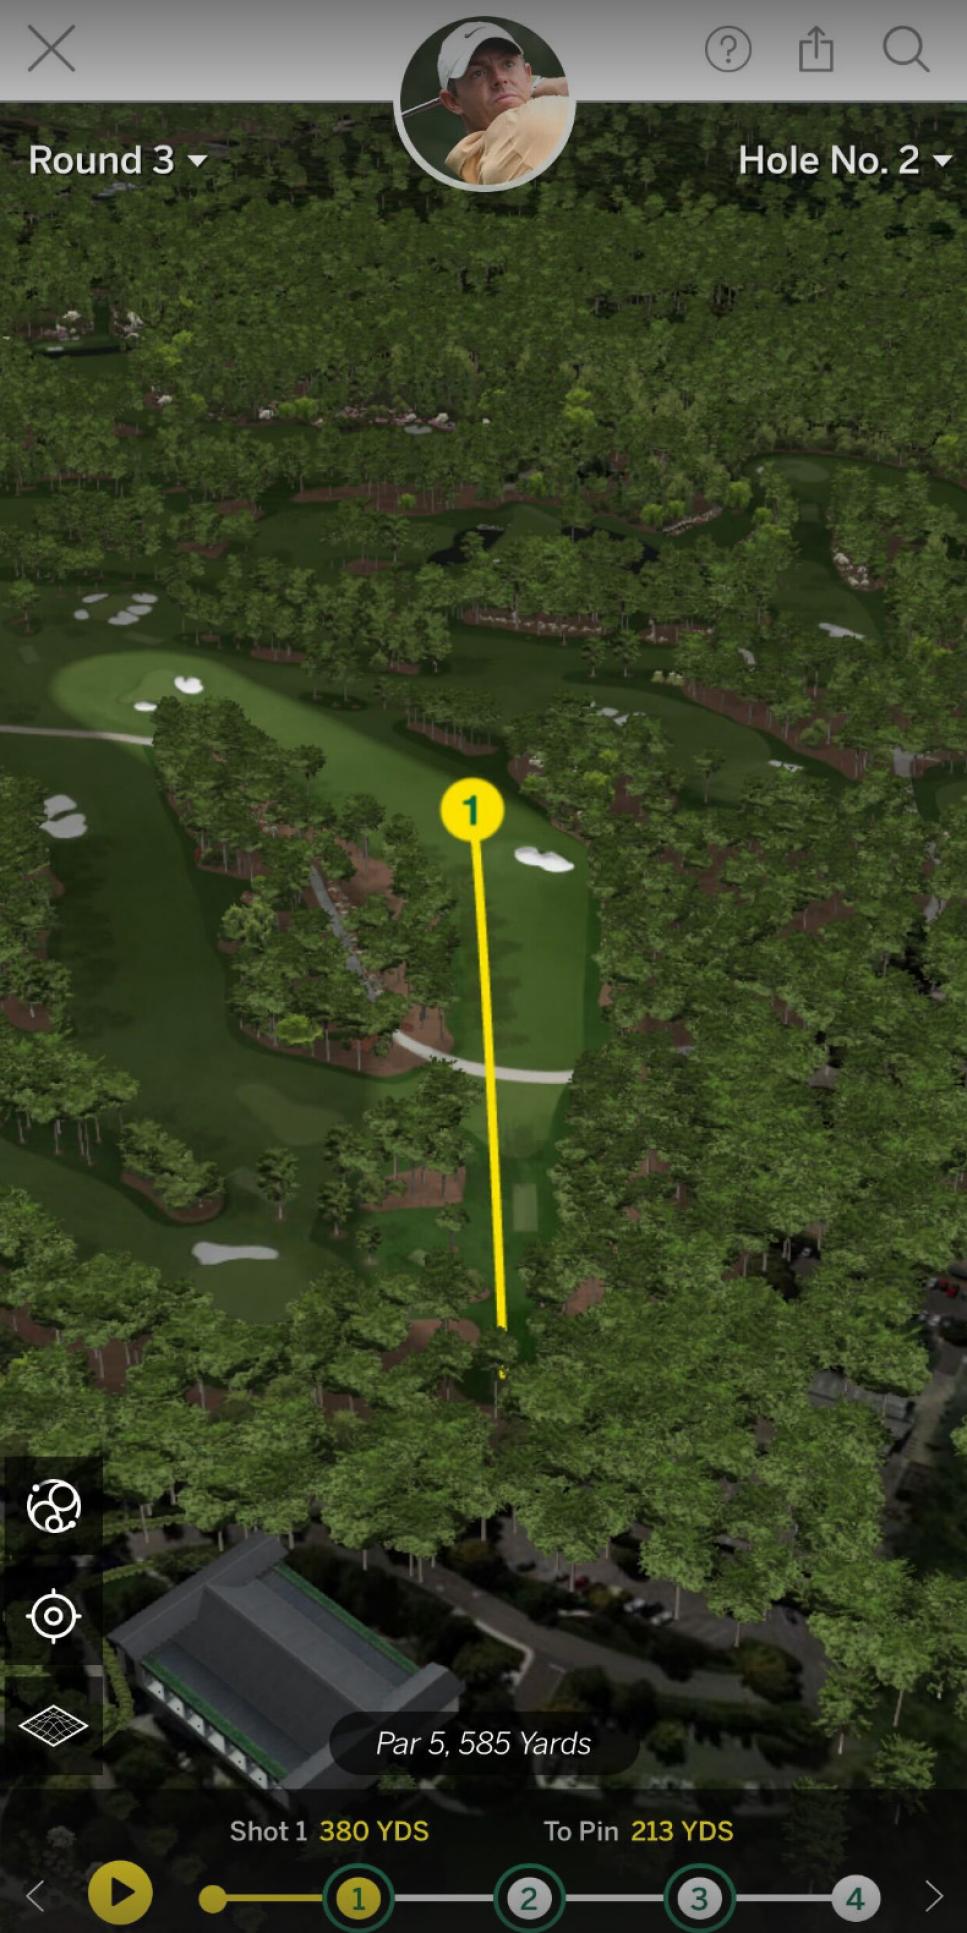 masters 2024 live updates: rory mcilroy just hit one of the longest tee shots at augusta we've ever seen